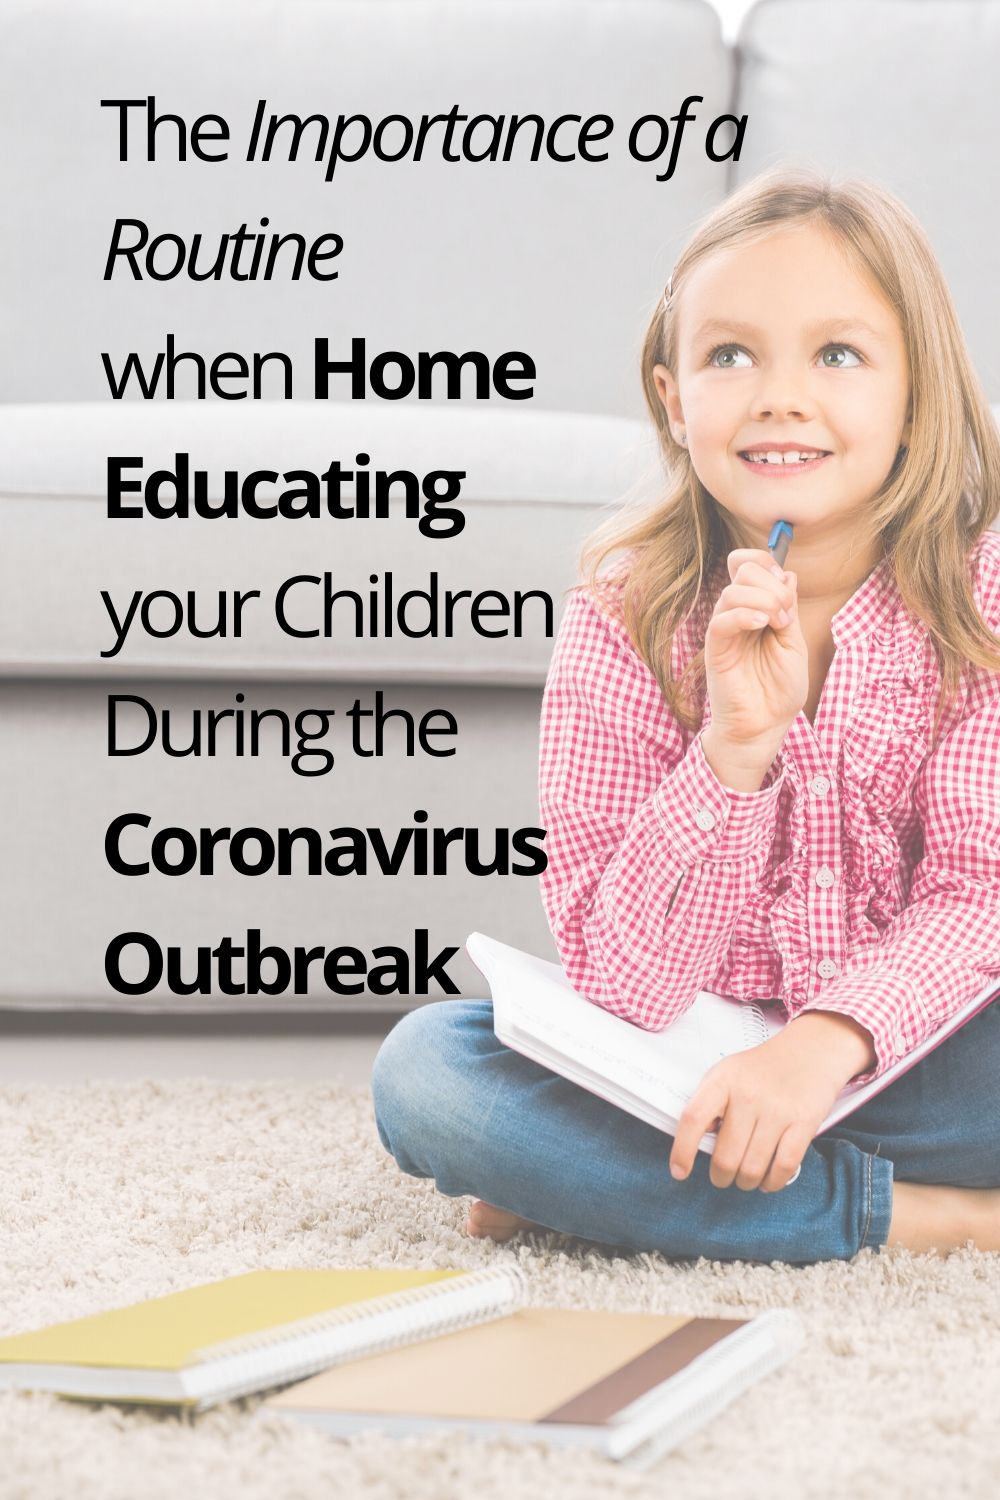 The Importance of a Routine when Home Educating your Children During the Coronavirus Outbreak